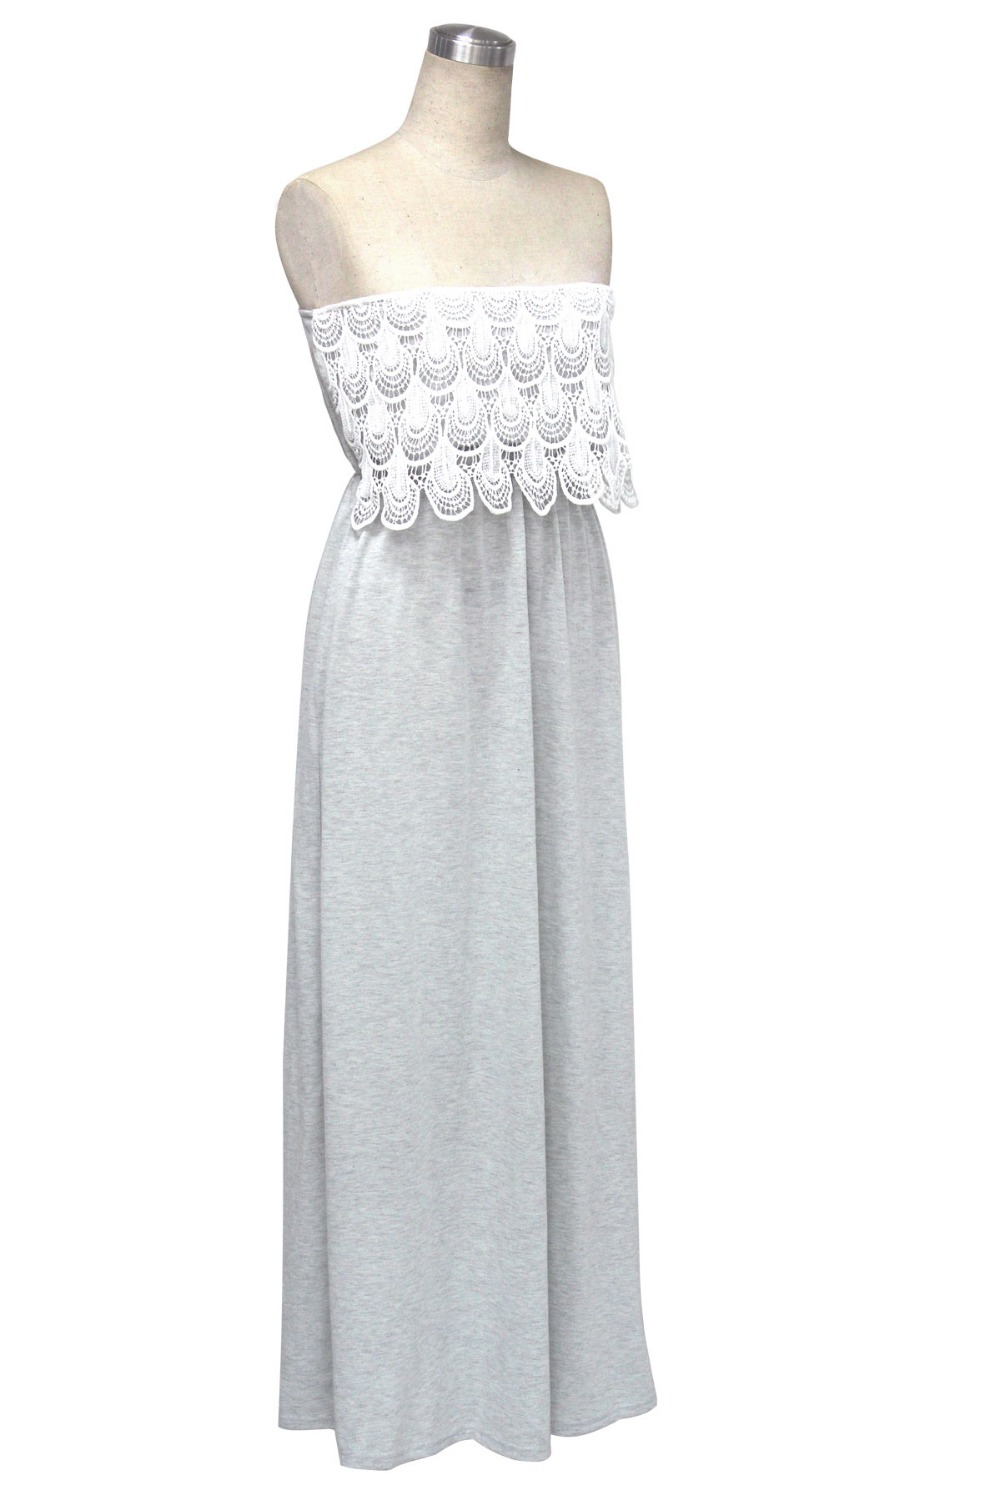 Summer Fashion women Gray Maxi Dresses Long Lace Strapless sleeveless Flor-length O-neck sexy Party dress